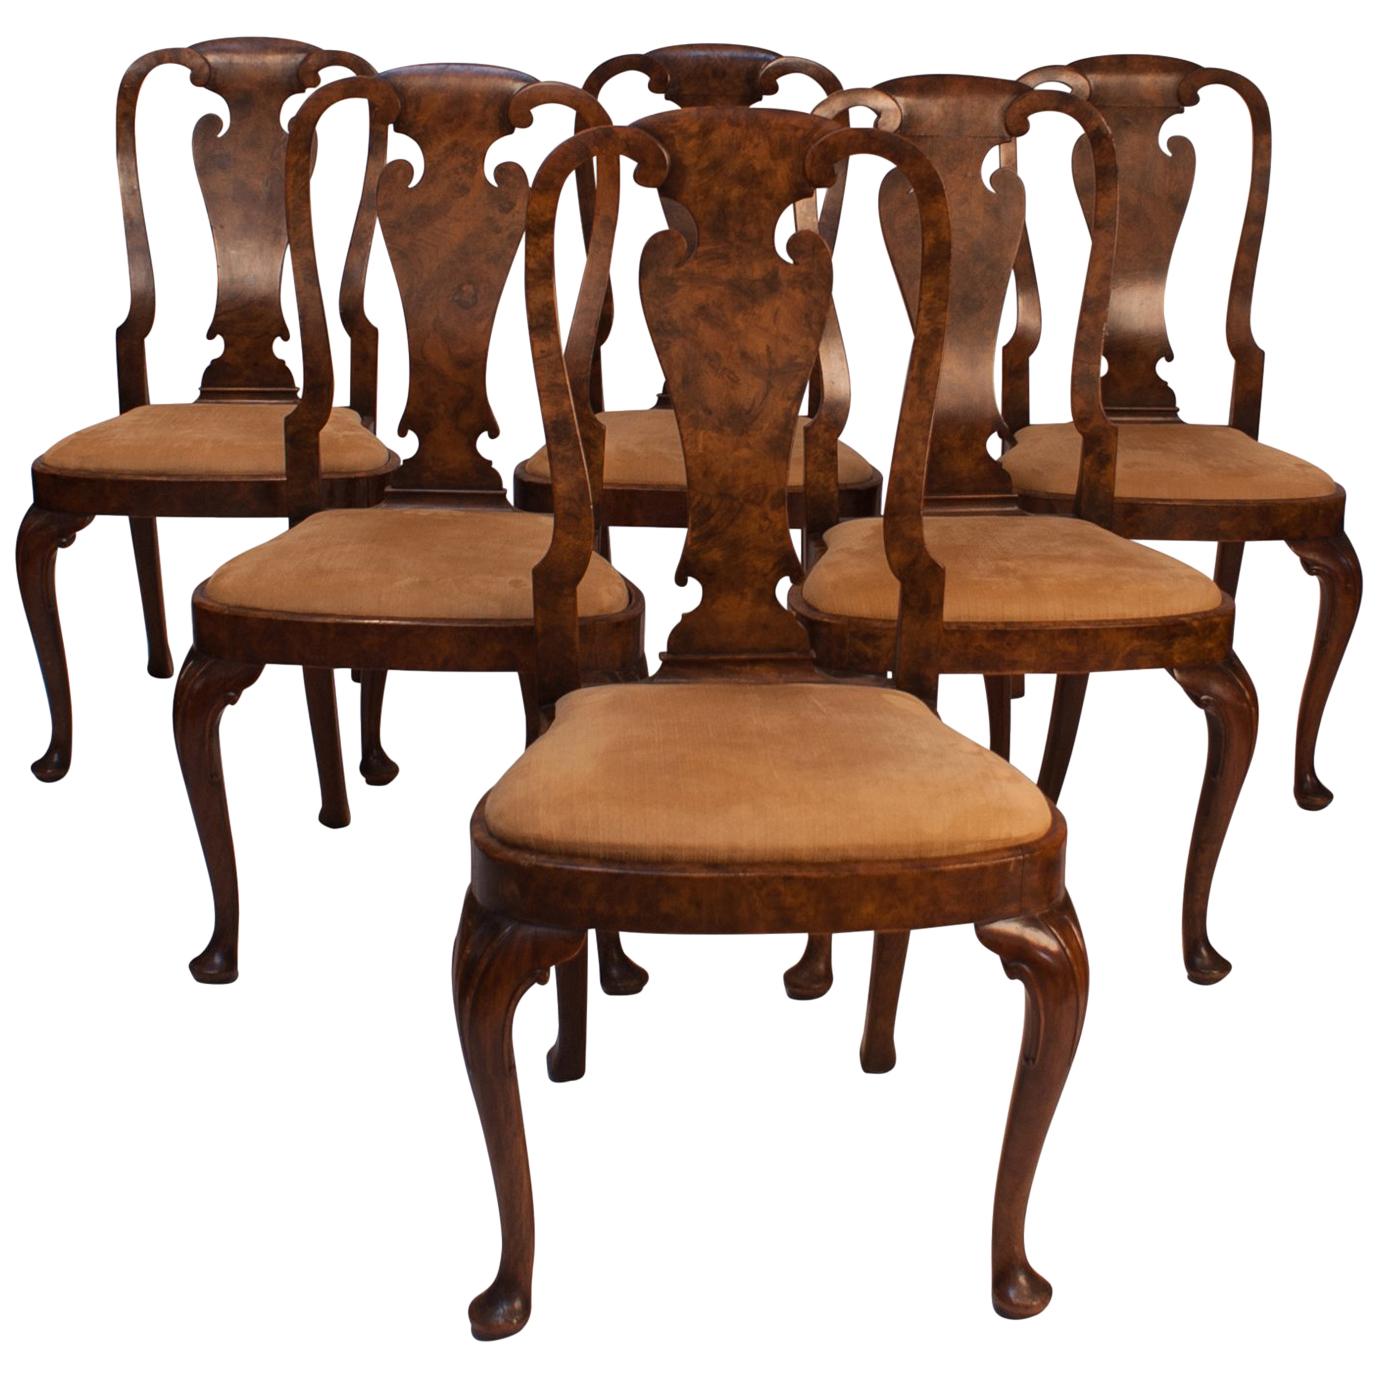 Set of 6 Queen Anne Style Walnut Dining Chairs, England, circa 1900